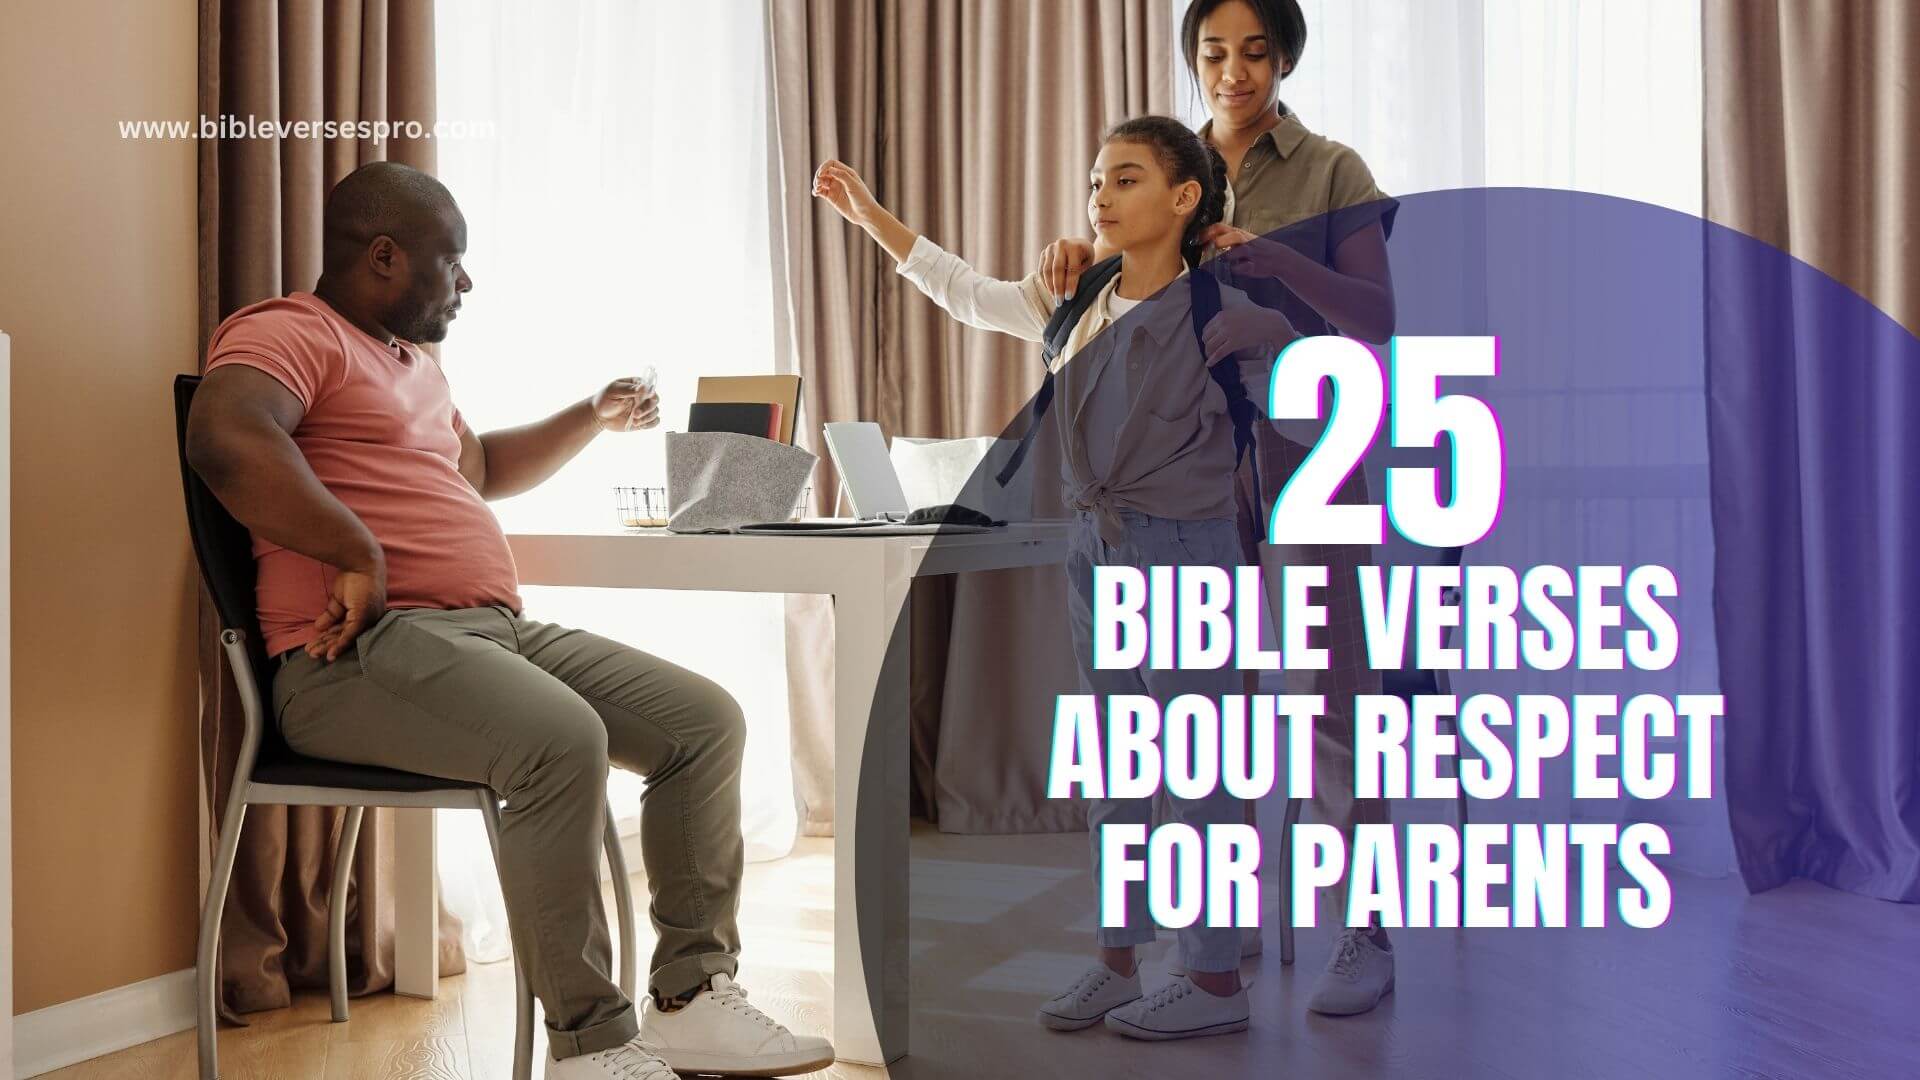 BIBLE VERSES ABOUT RESPECT FOR PARENTS (1)